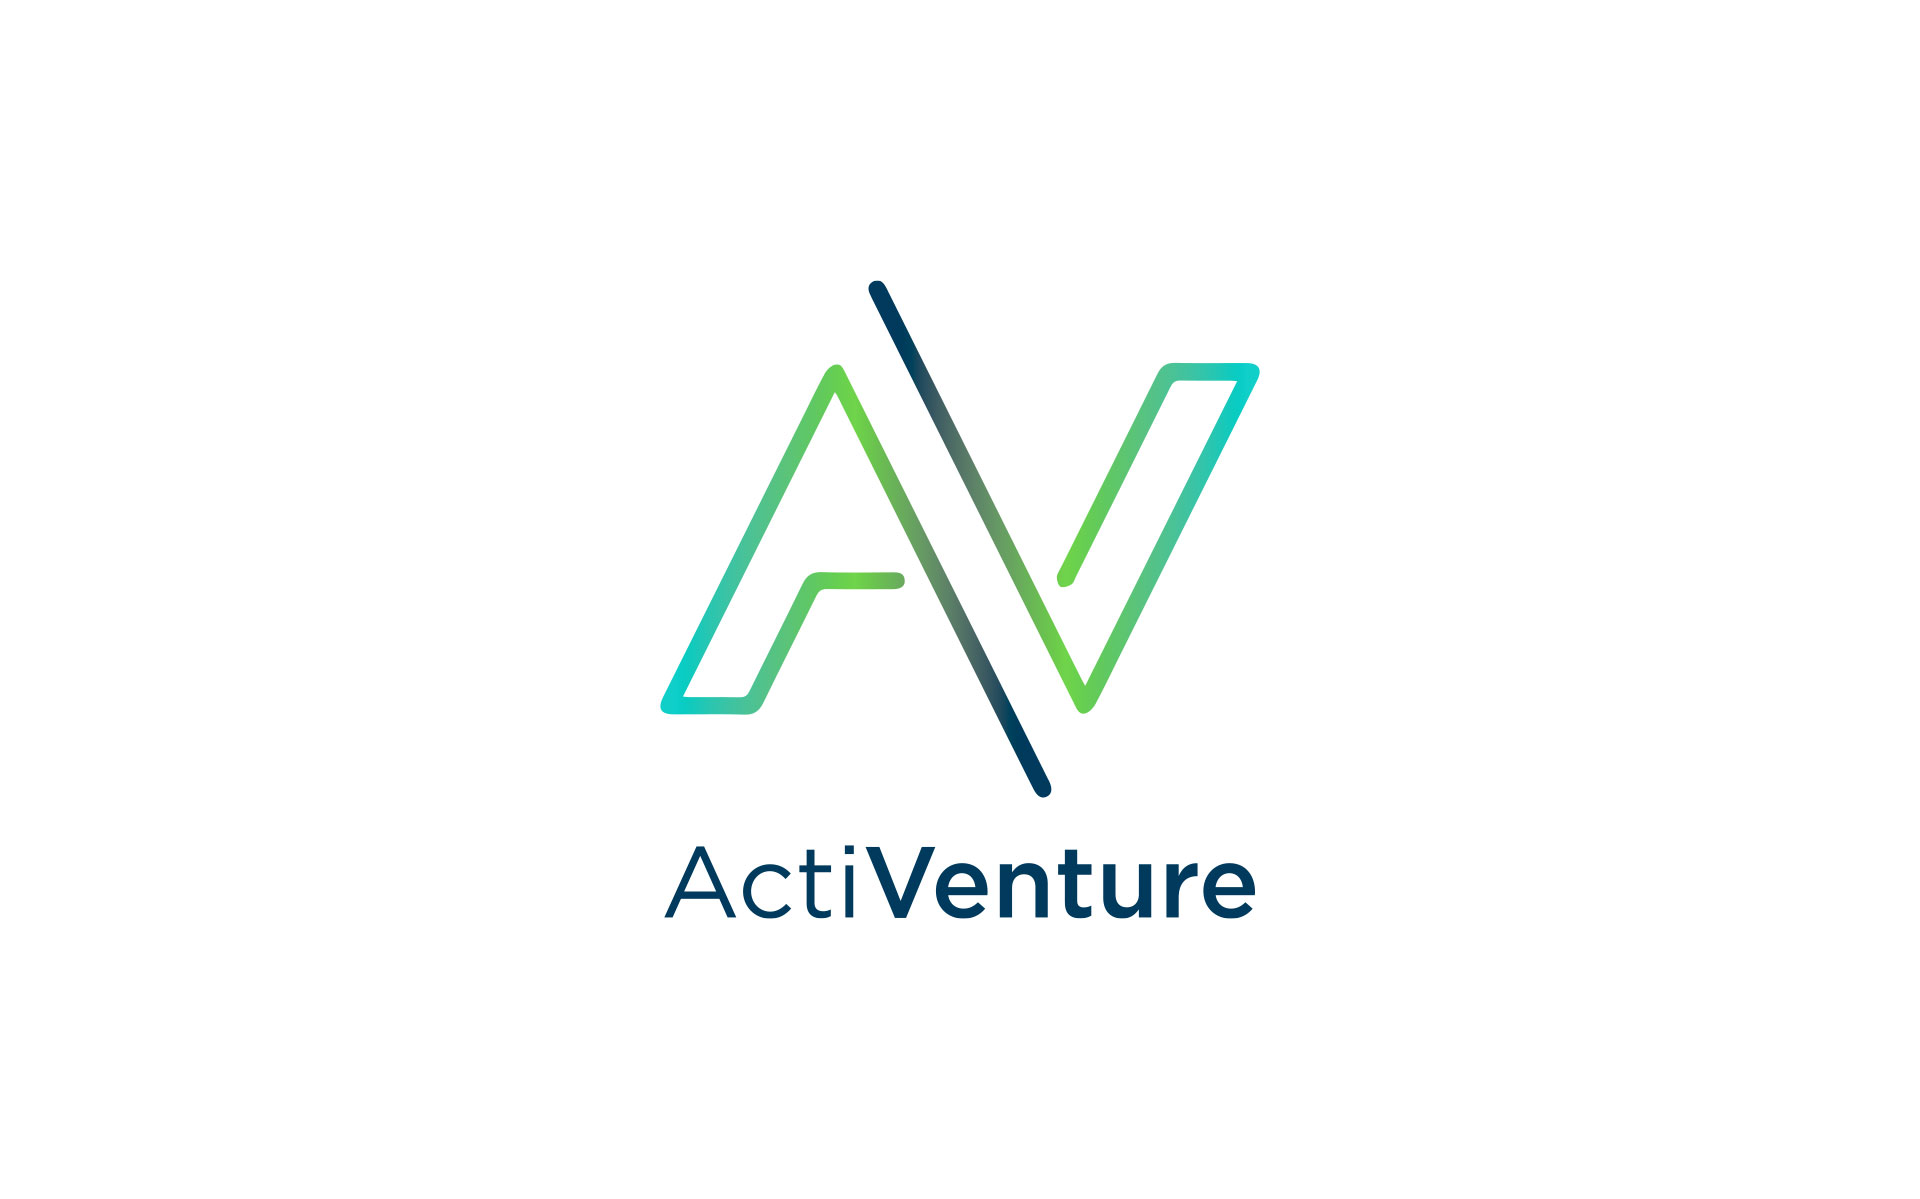 Activenture logo & branding designed by Amy at Yellow Sunday